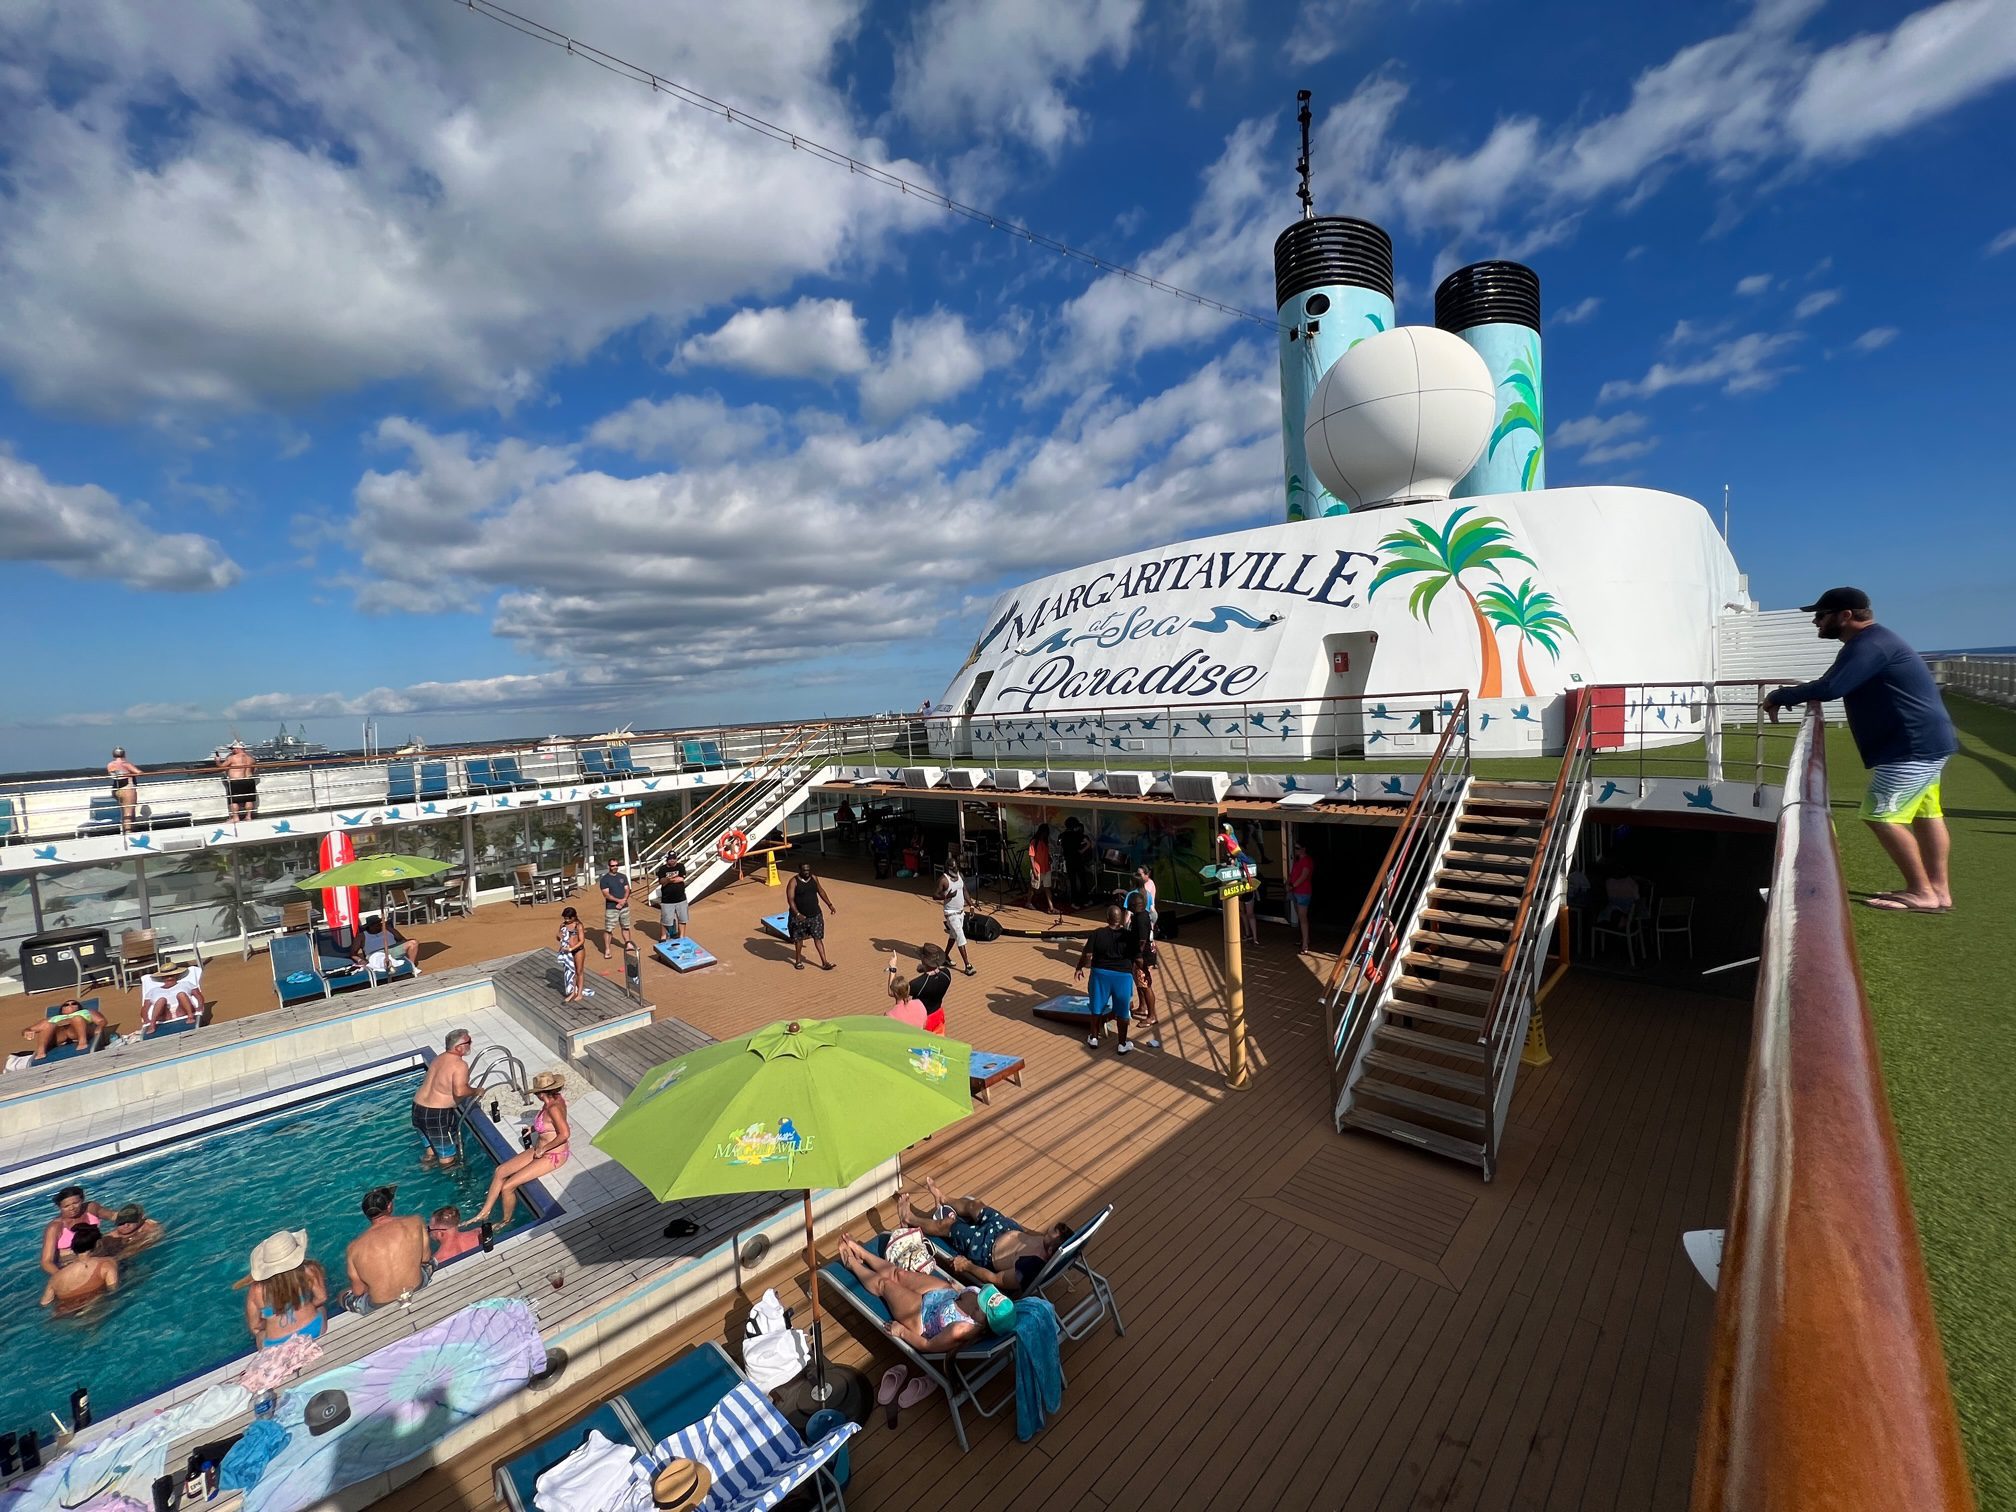 margaritaville at sea travel requirements